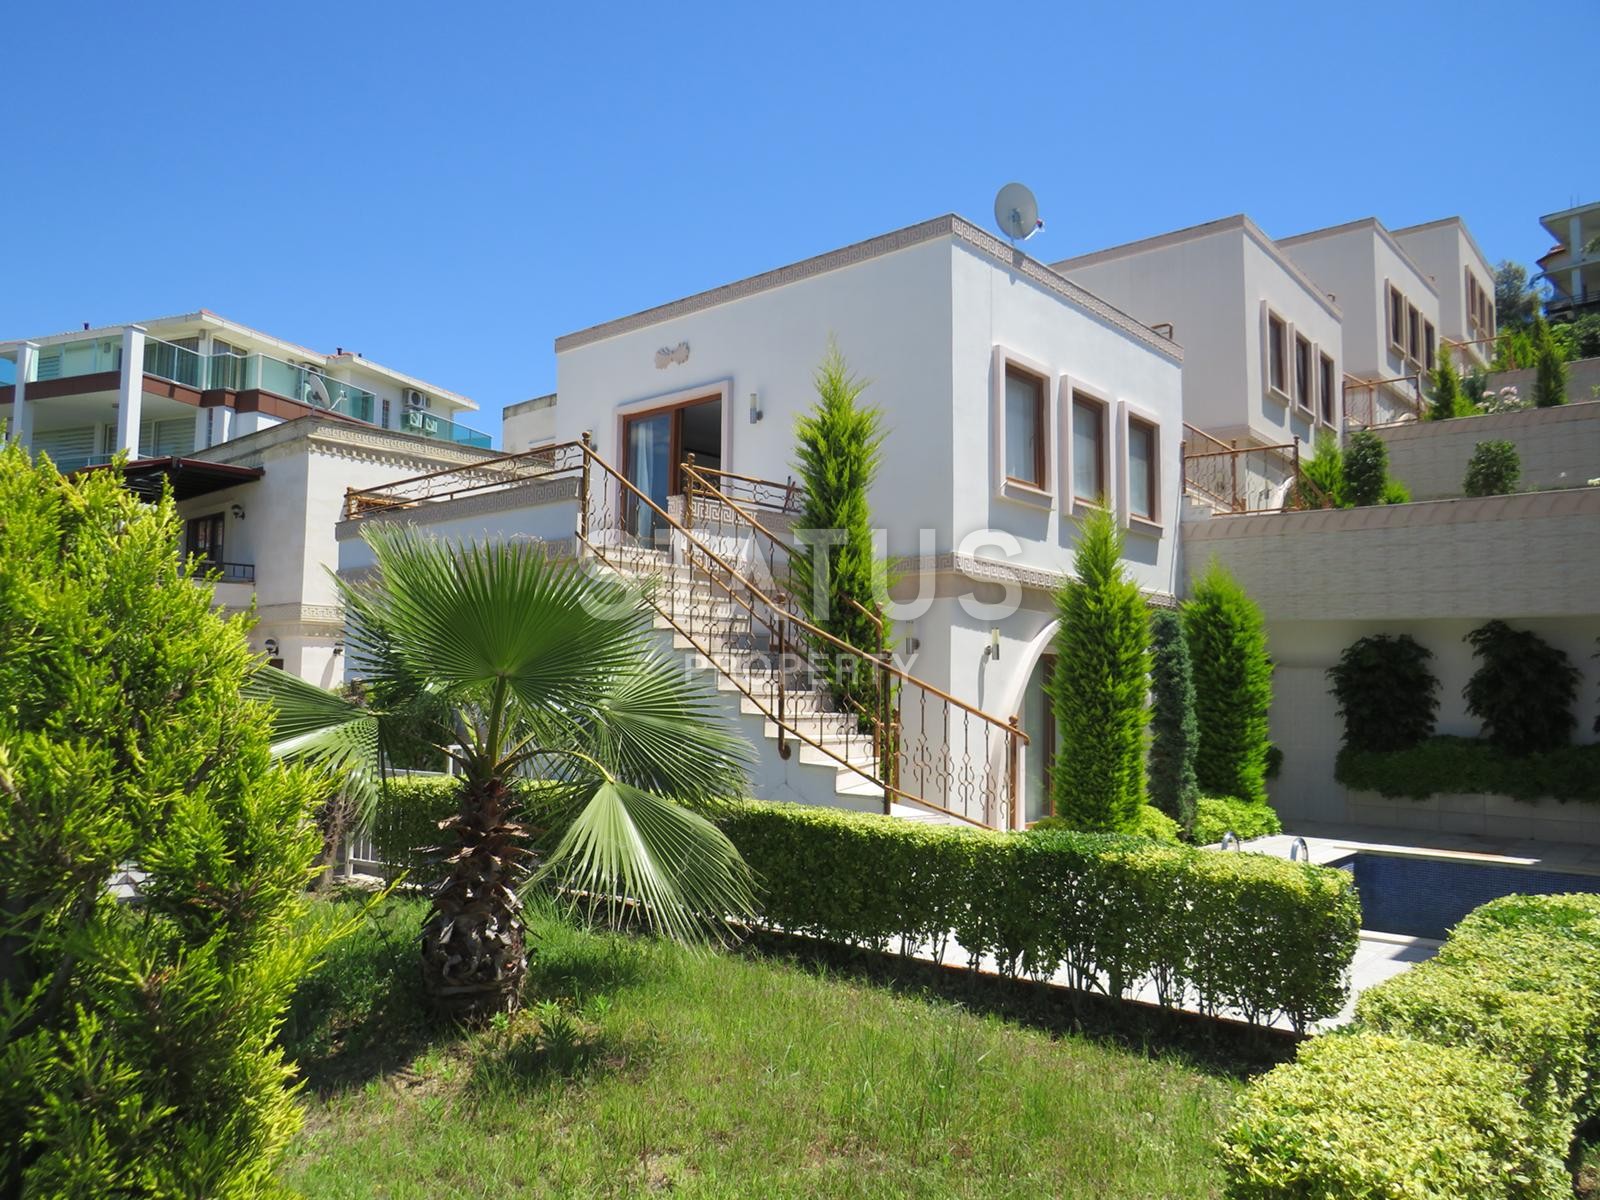 Villa 2+1 renovated and furnished in Kargicak, 120 m2 фото 2